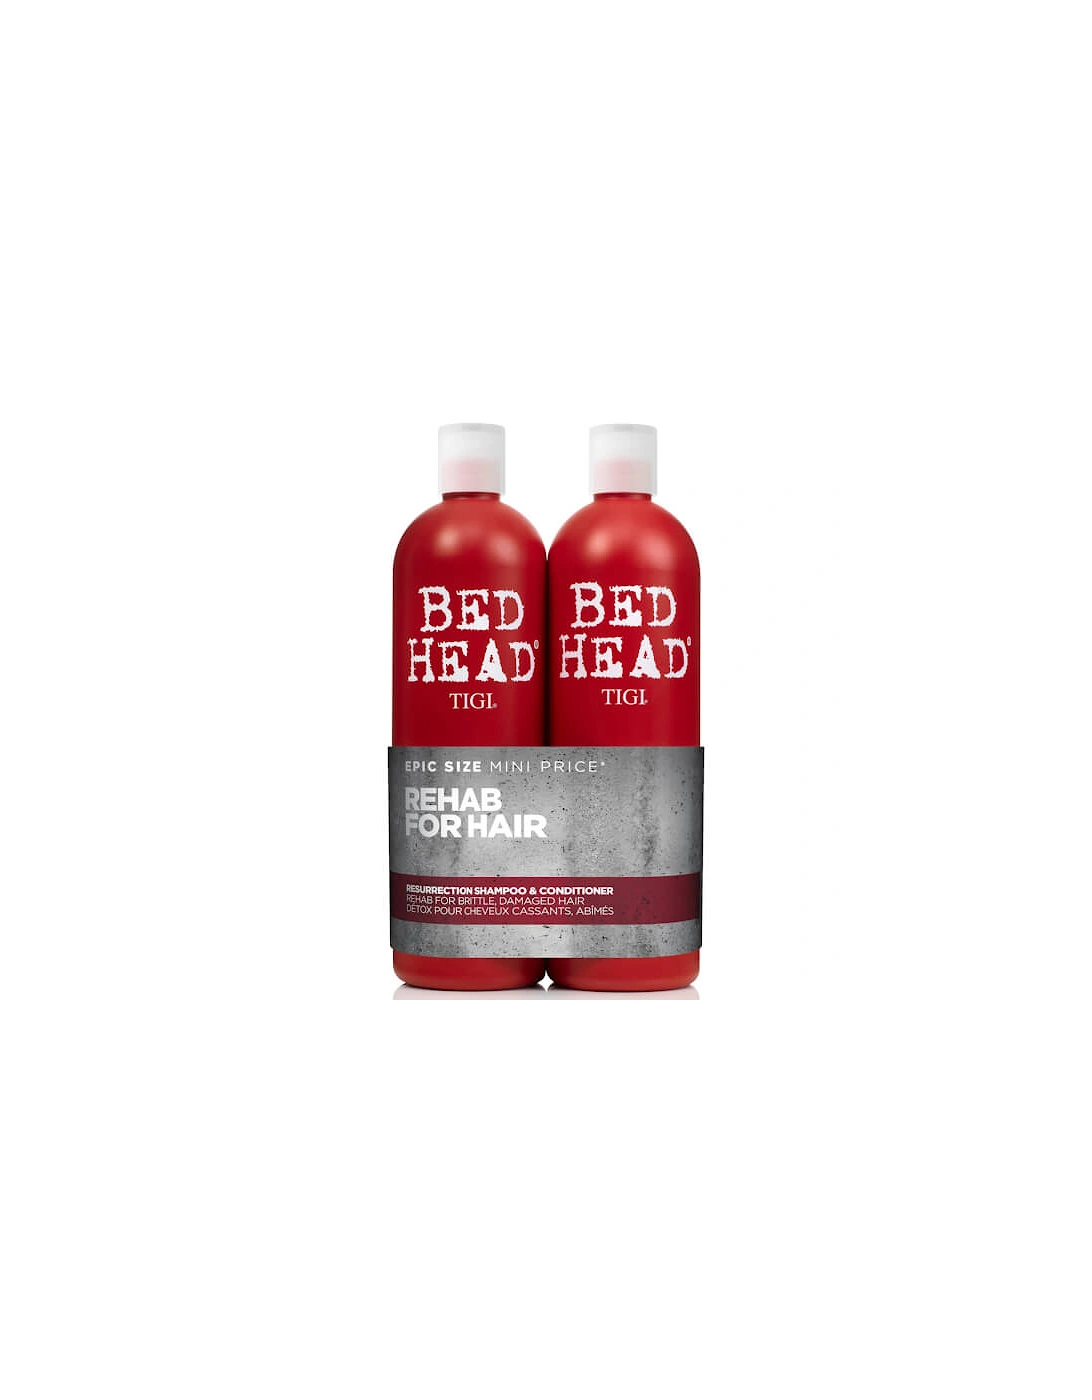 Bed Head Urban Antidotes Resurrection Shampoo and Conditioner for Very Dry Hair 2 x 750ml, 2 of 1